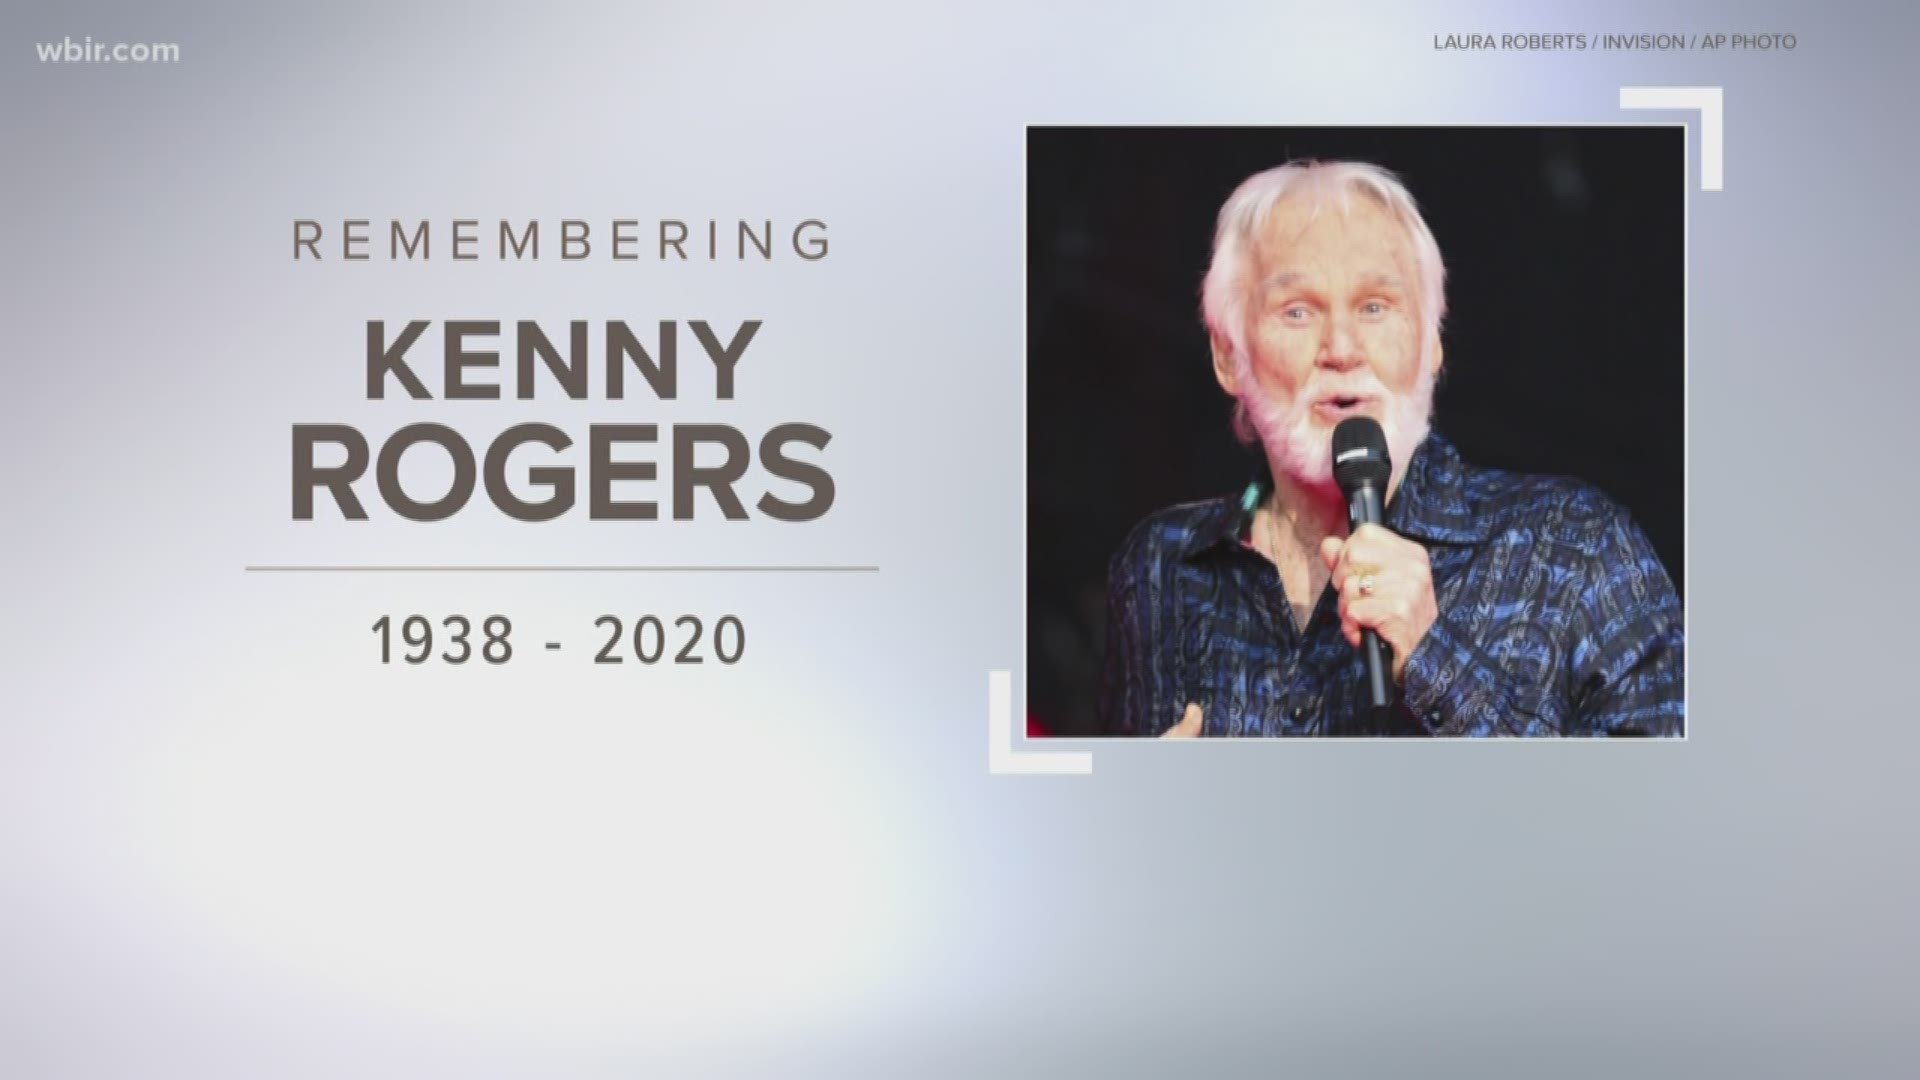 Dolly Parton and other celebrities paid tribute to the late singer on Saturday.